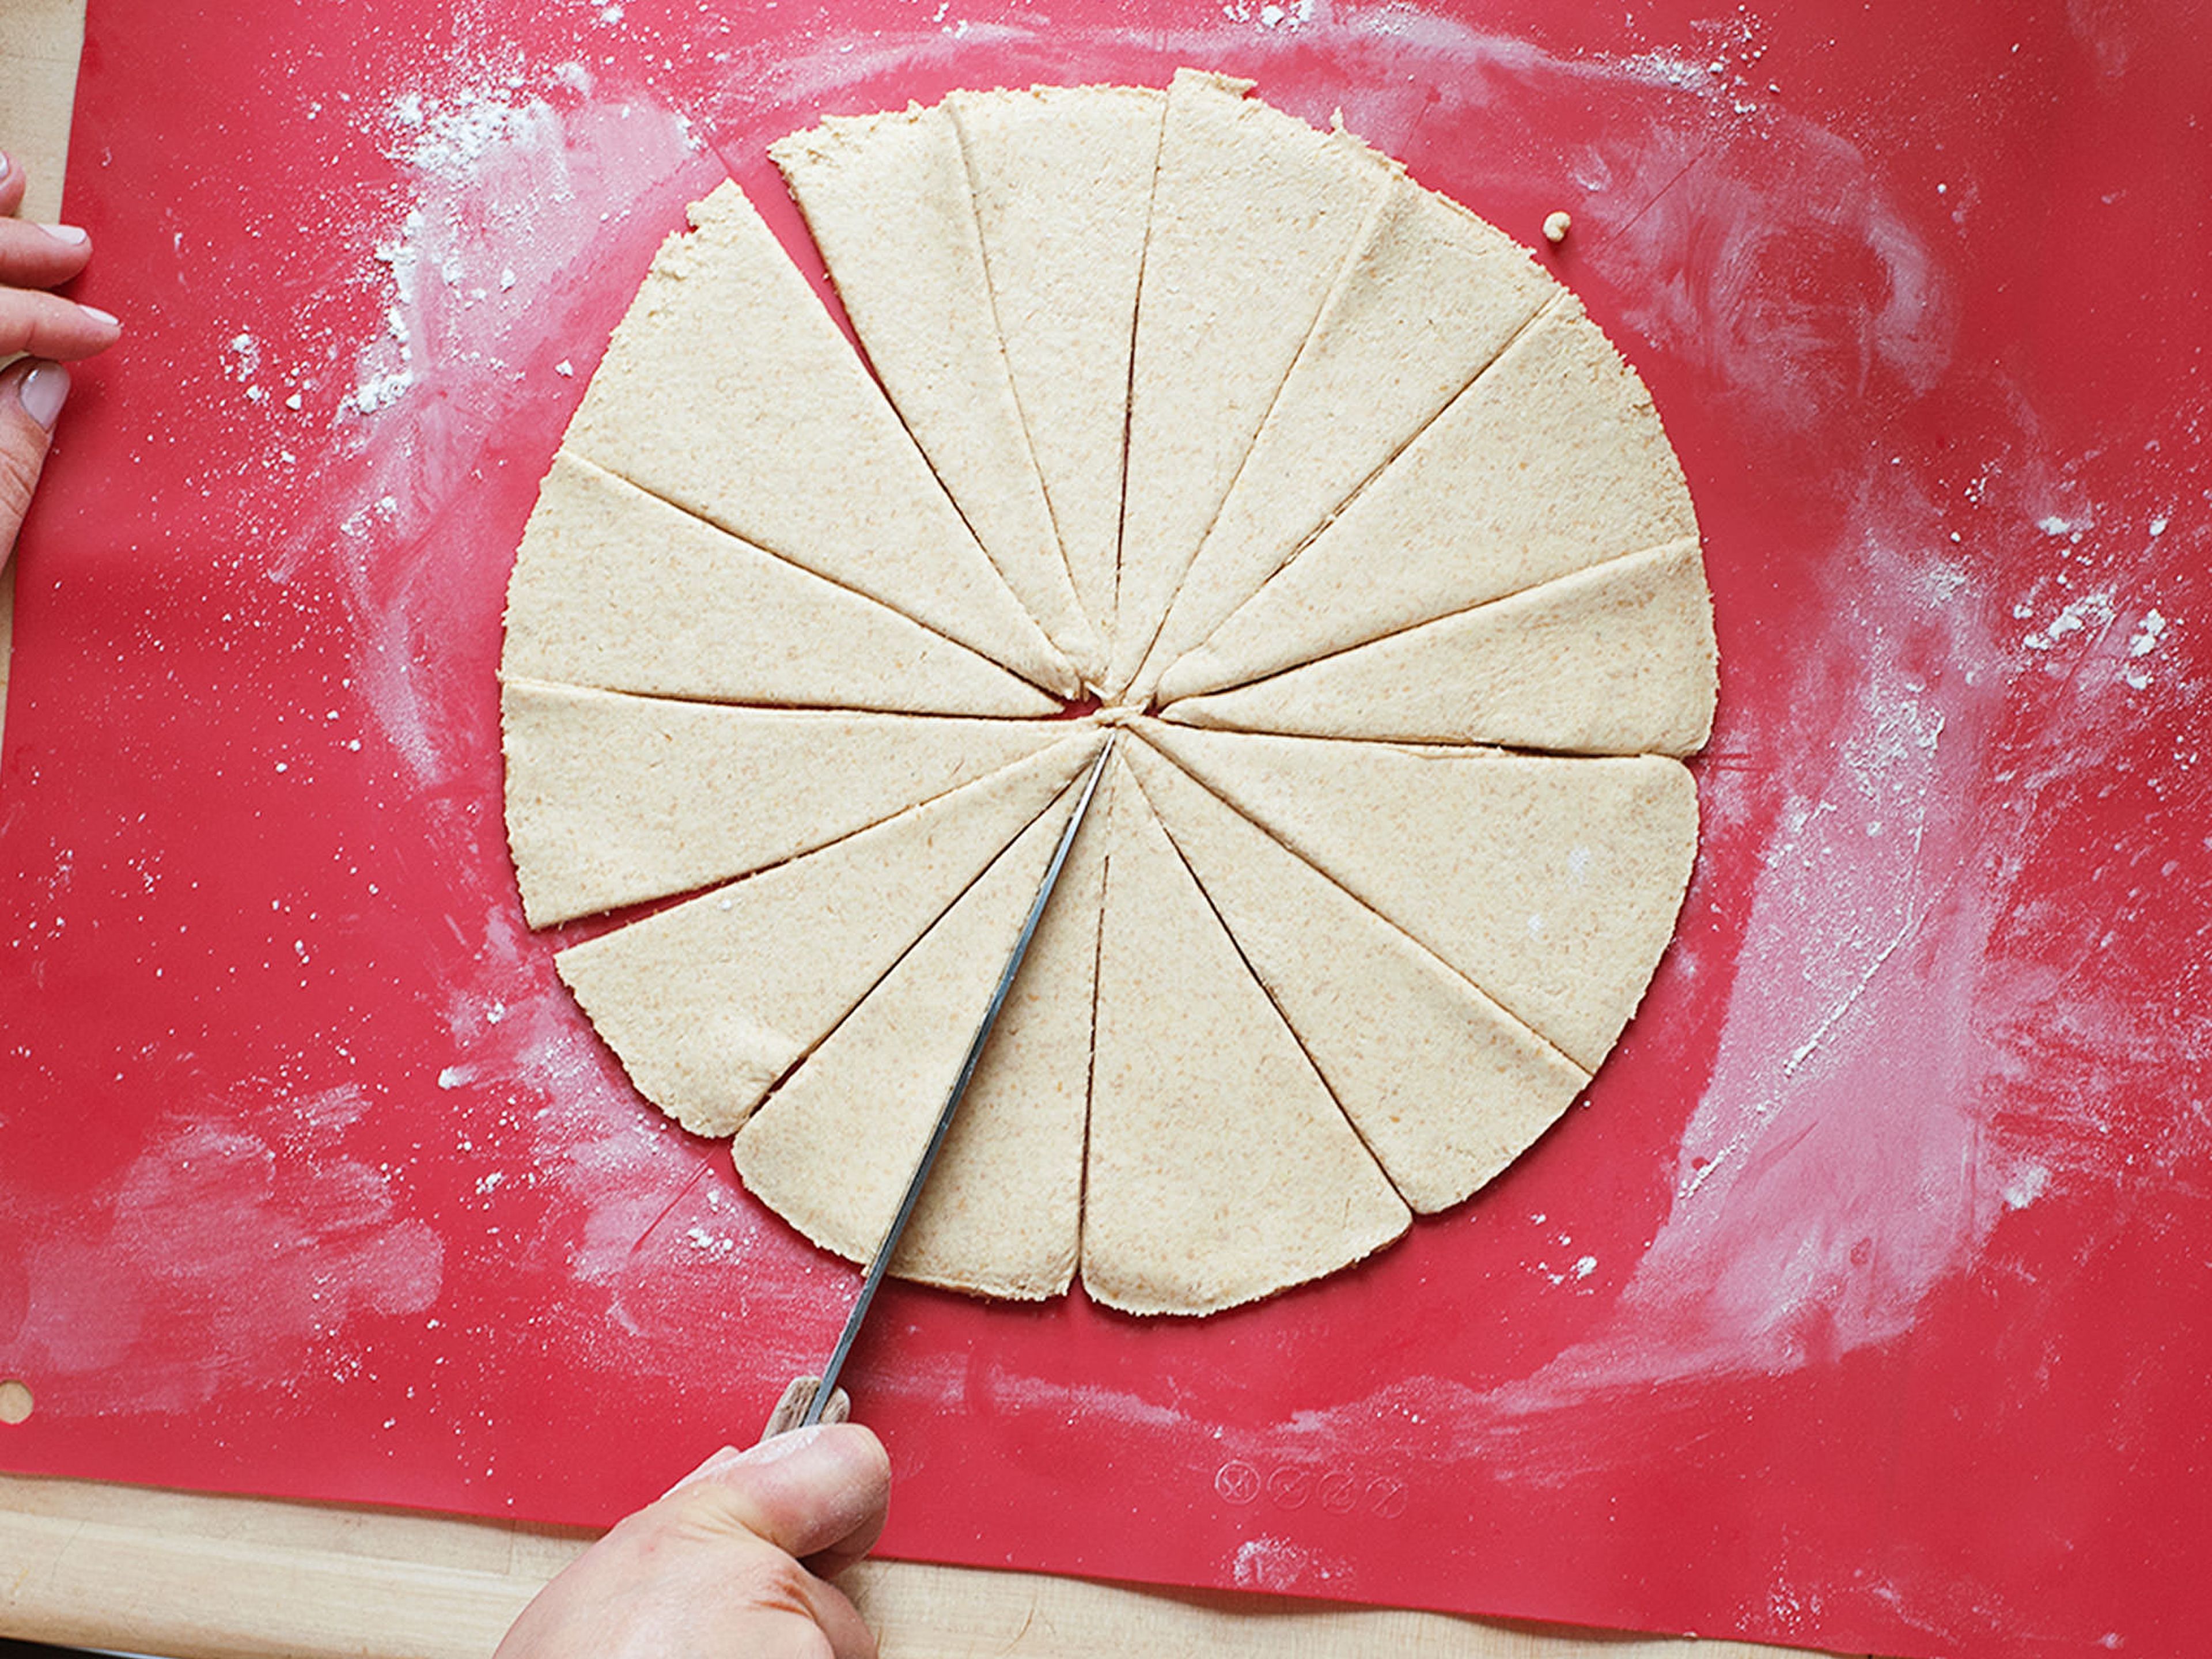 On a floured surface, roll out dough into a round (approx. 26 cm/10 in.). If necessary, use a plate as a guide and add flour for dusting. Cut dough into 16 equal triangles.